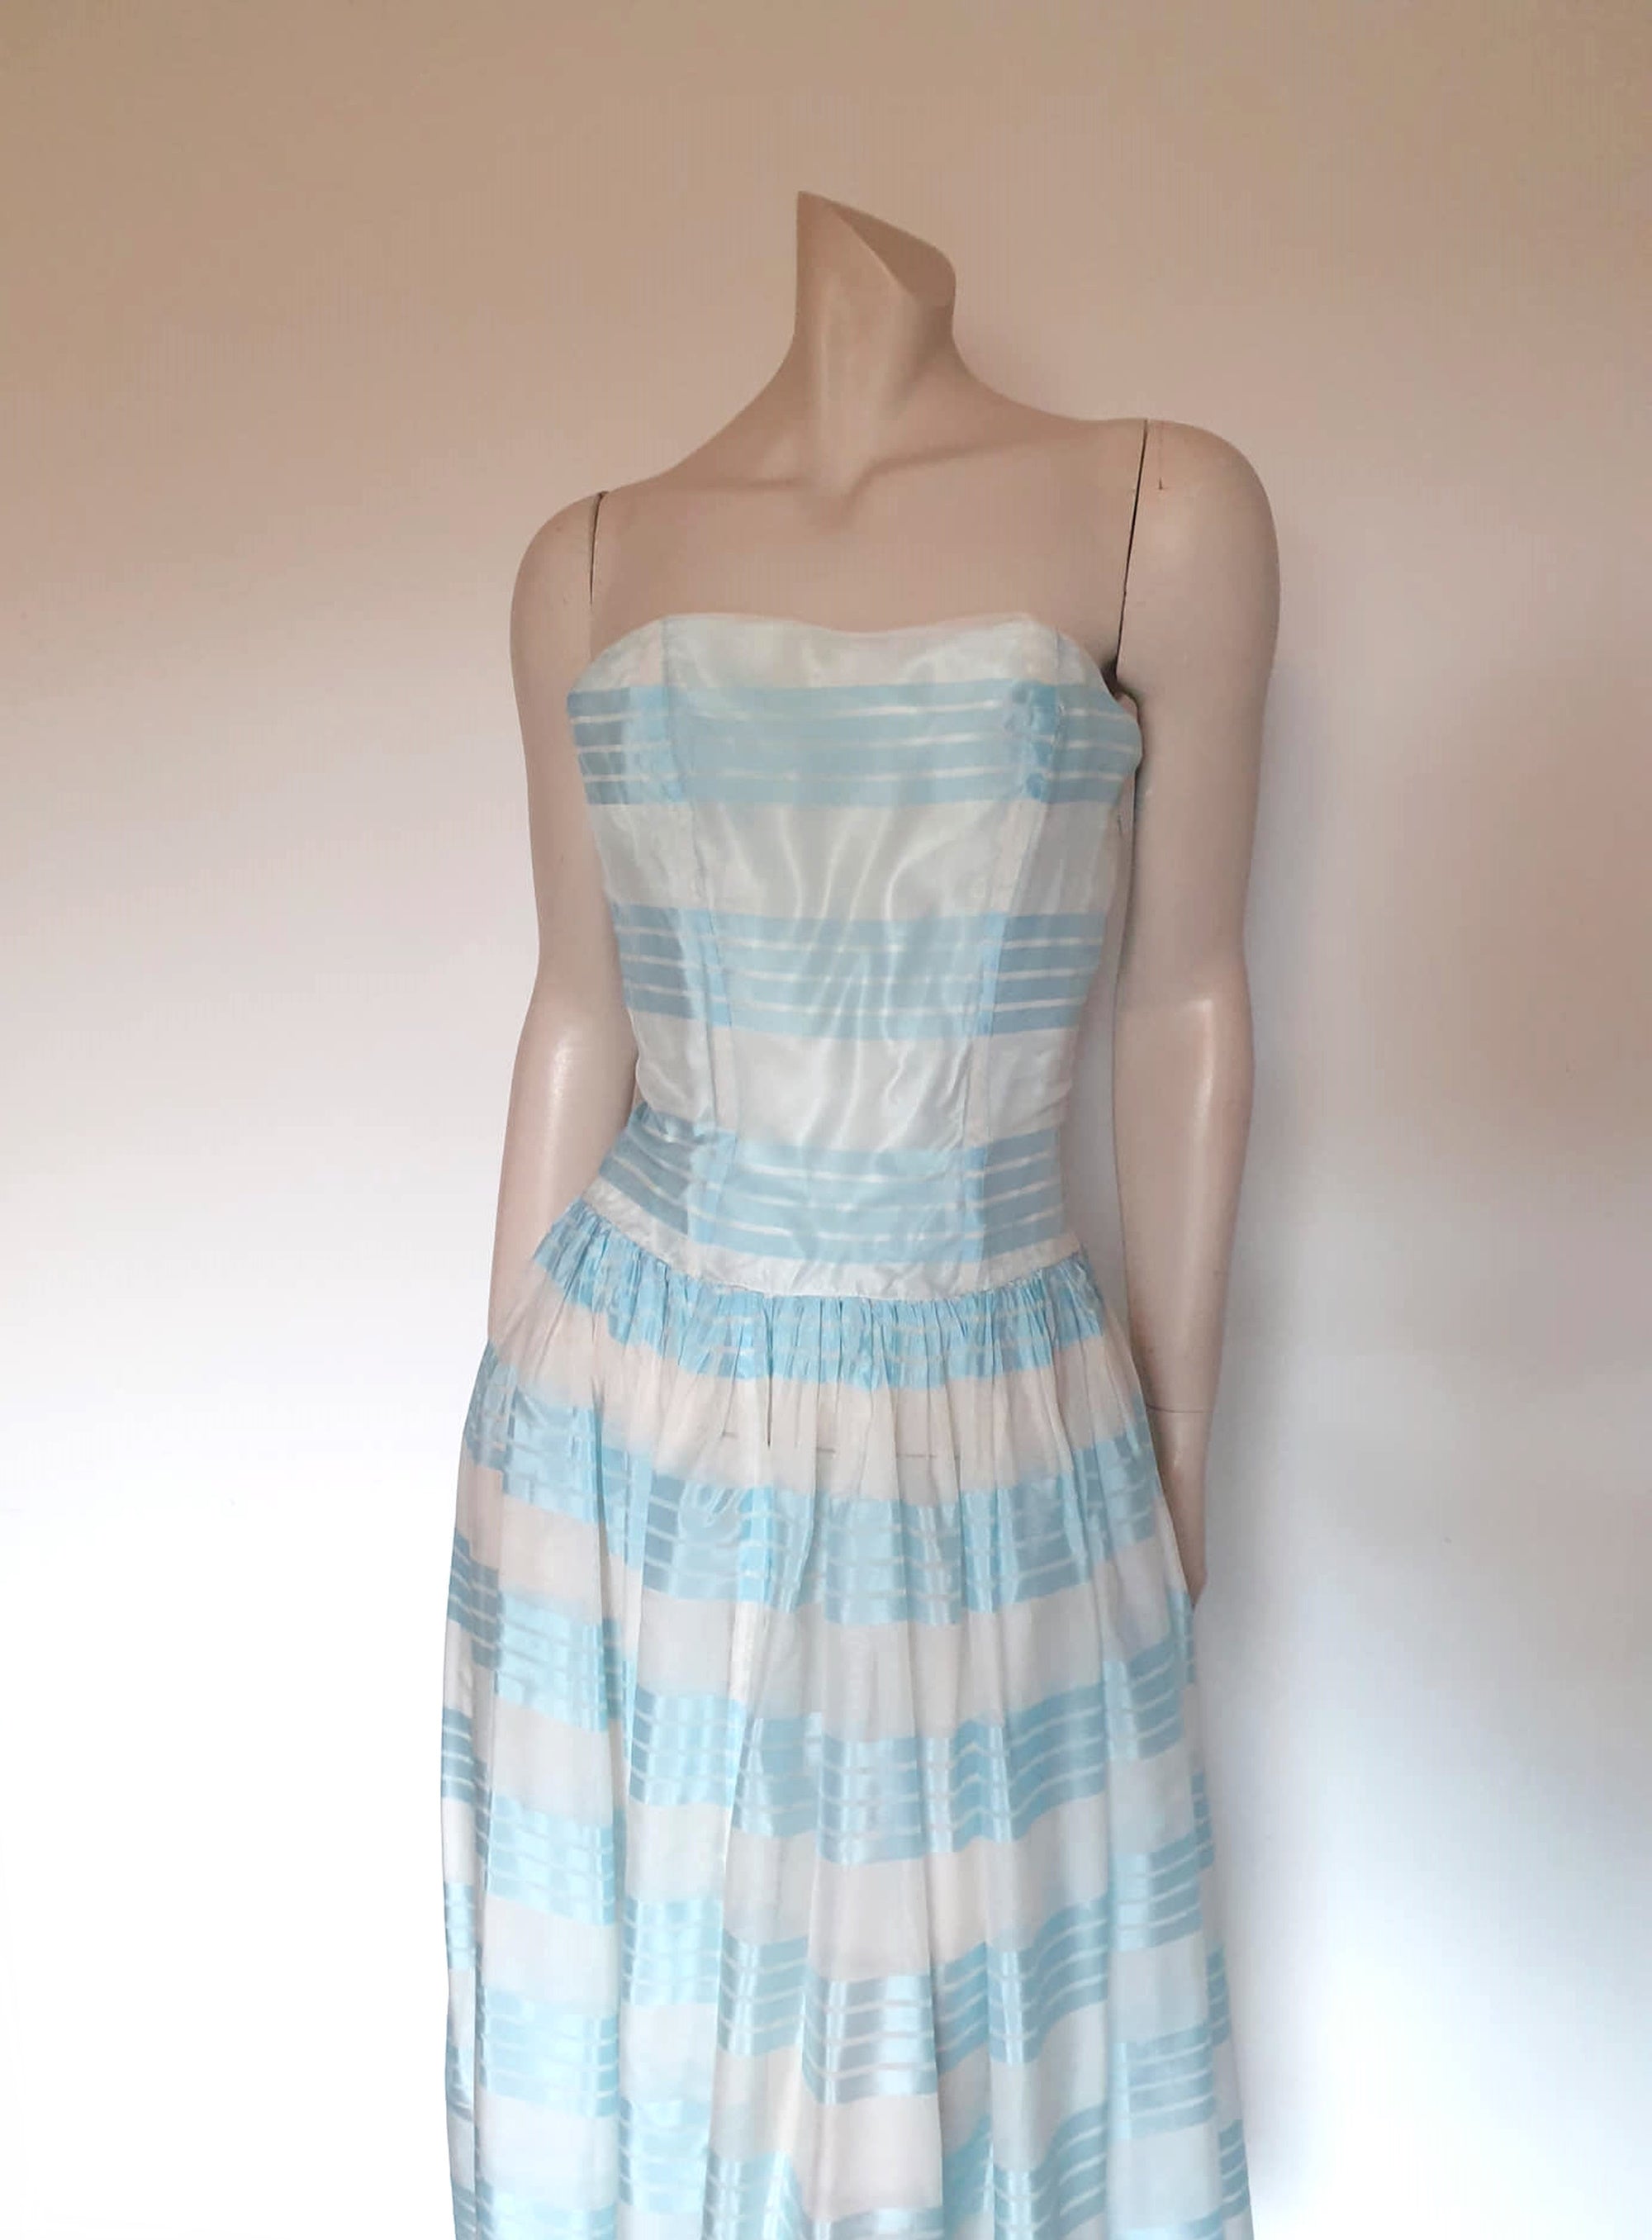 1950s vintage blue and white strapless dress small